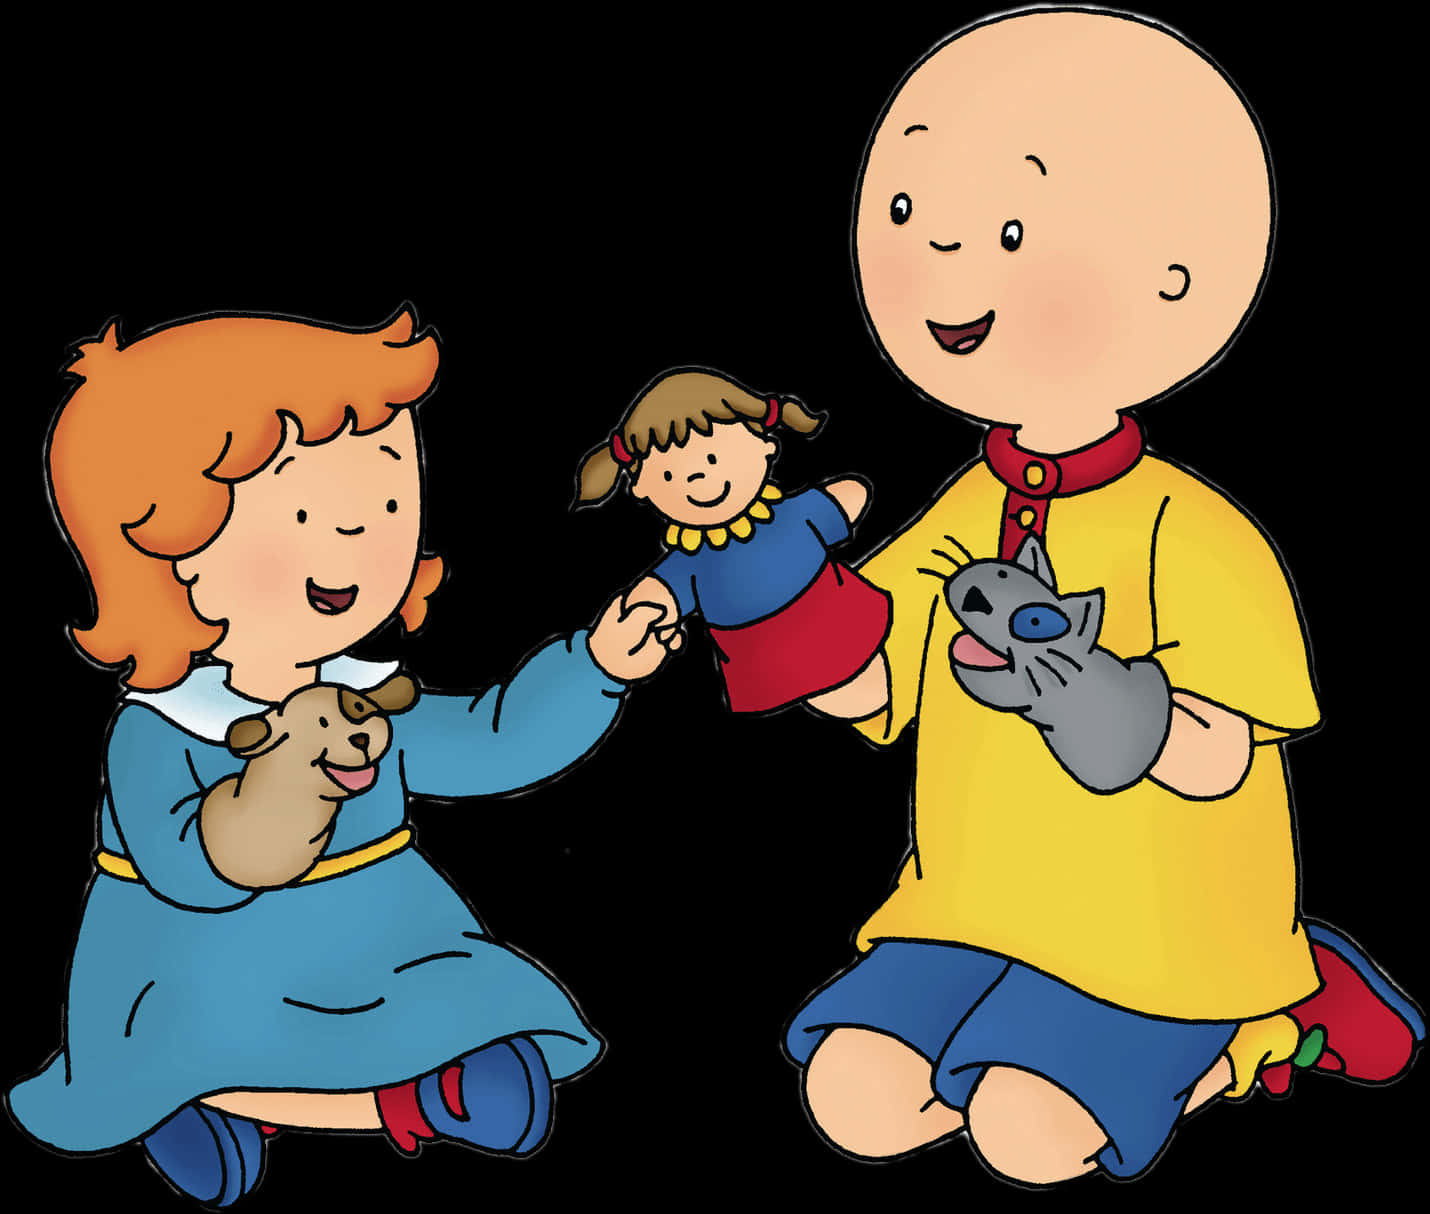 A Cartoon Of A Boy And Girl Holding Dolls